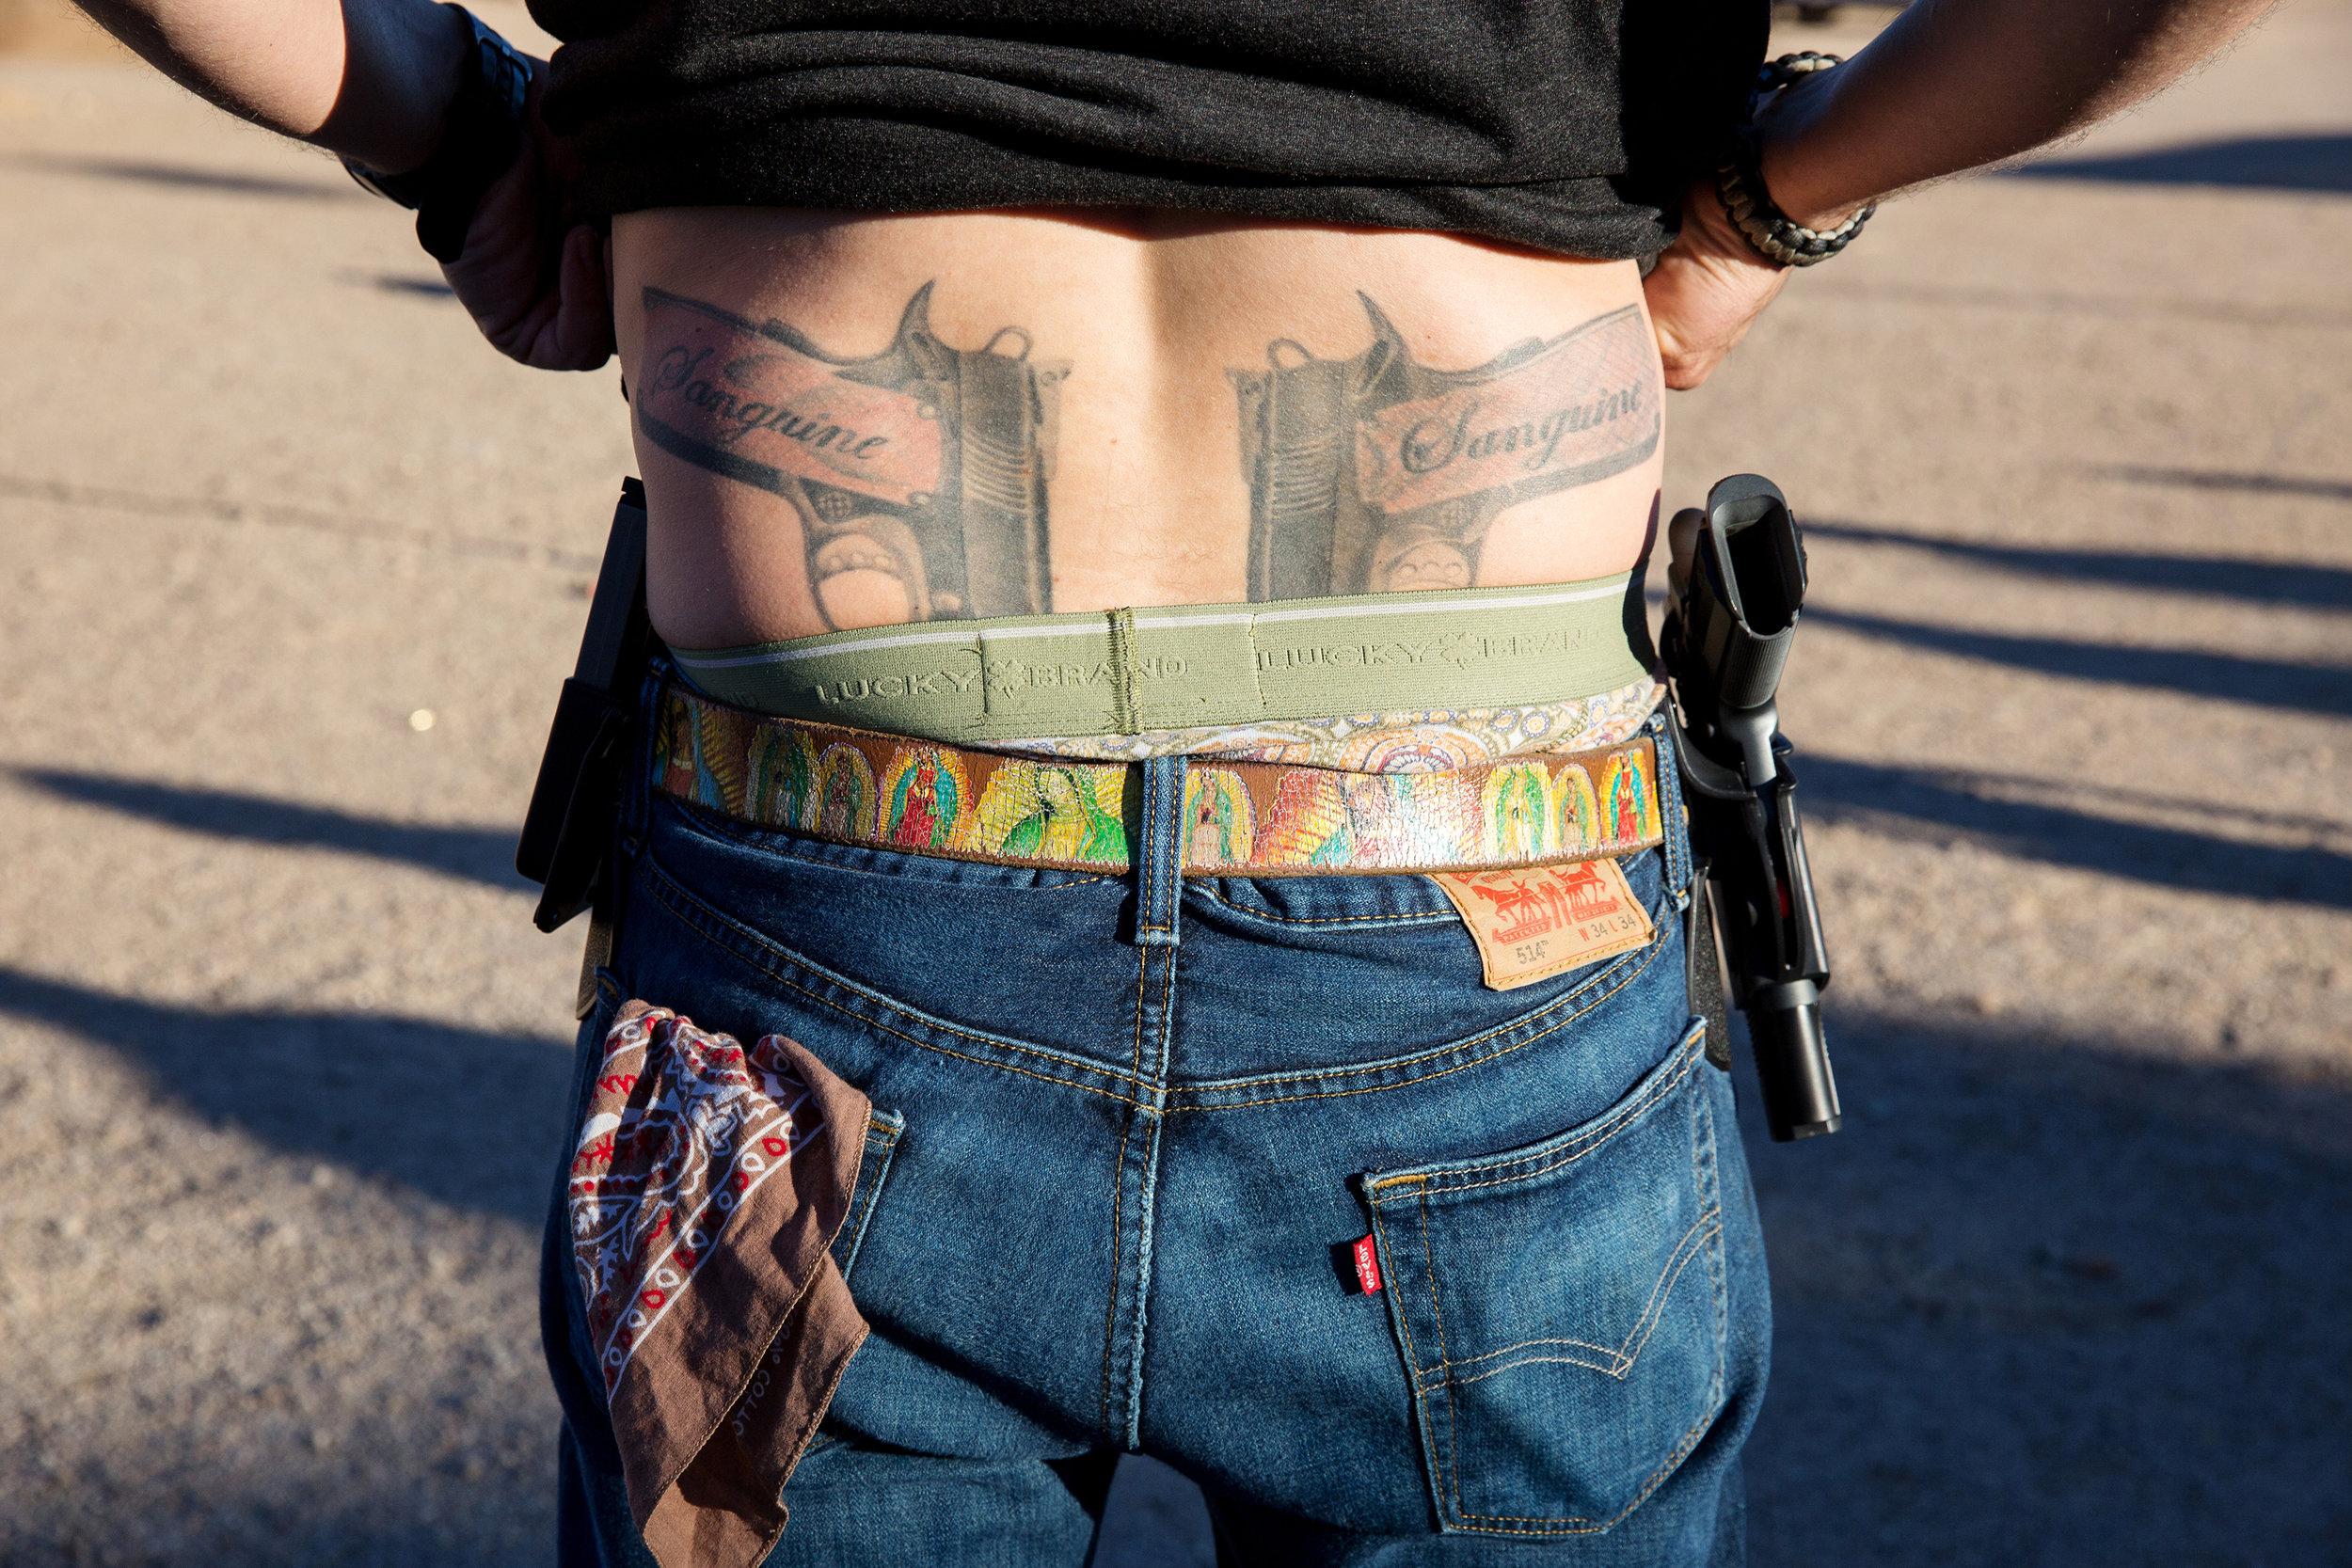  Joe Proctor lifts up his shirt to show his tattoos of guns that read “Sanguine” on the grips at the Rio Salado Sportsman’s Club on Jan. 30, 2016, in Mesa, Arizona. His worn-down belt features the Virgin Mary, and he carries an unloaded gun on one hi